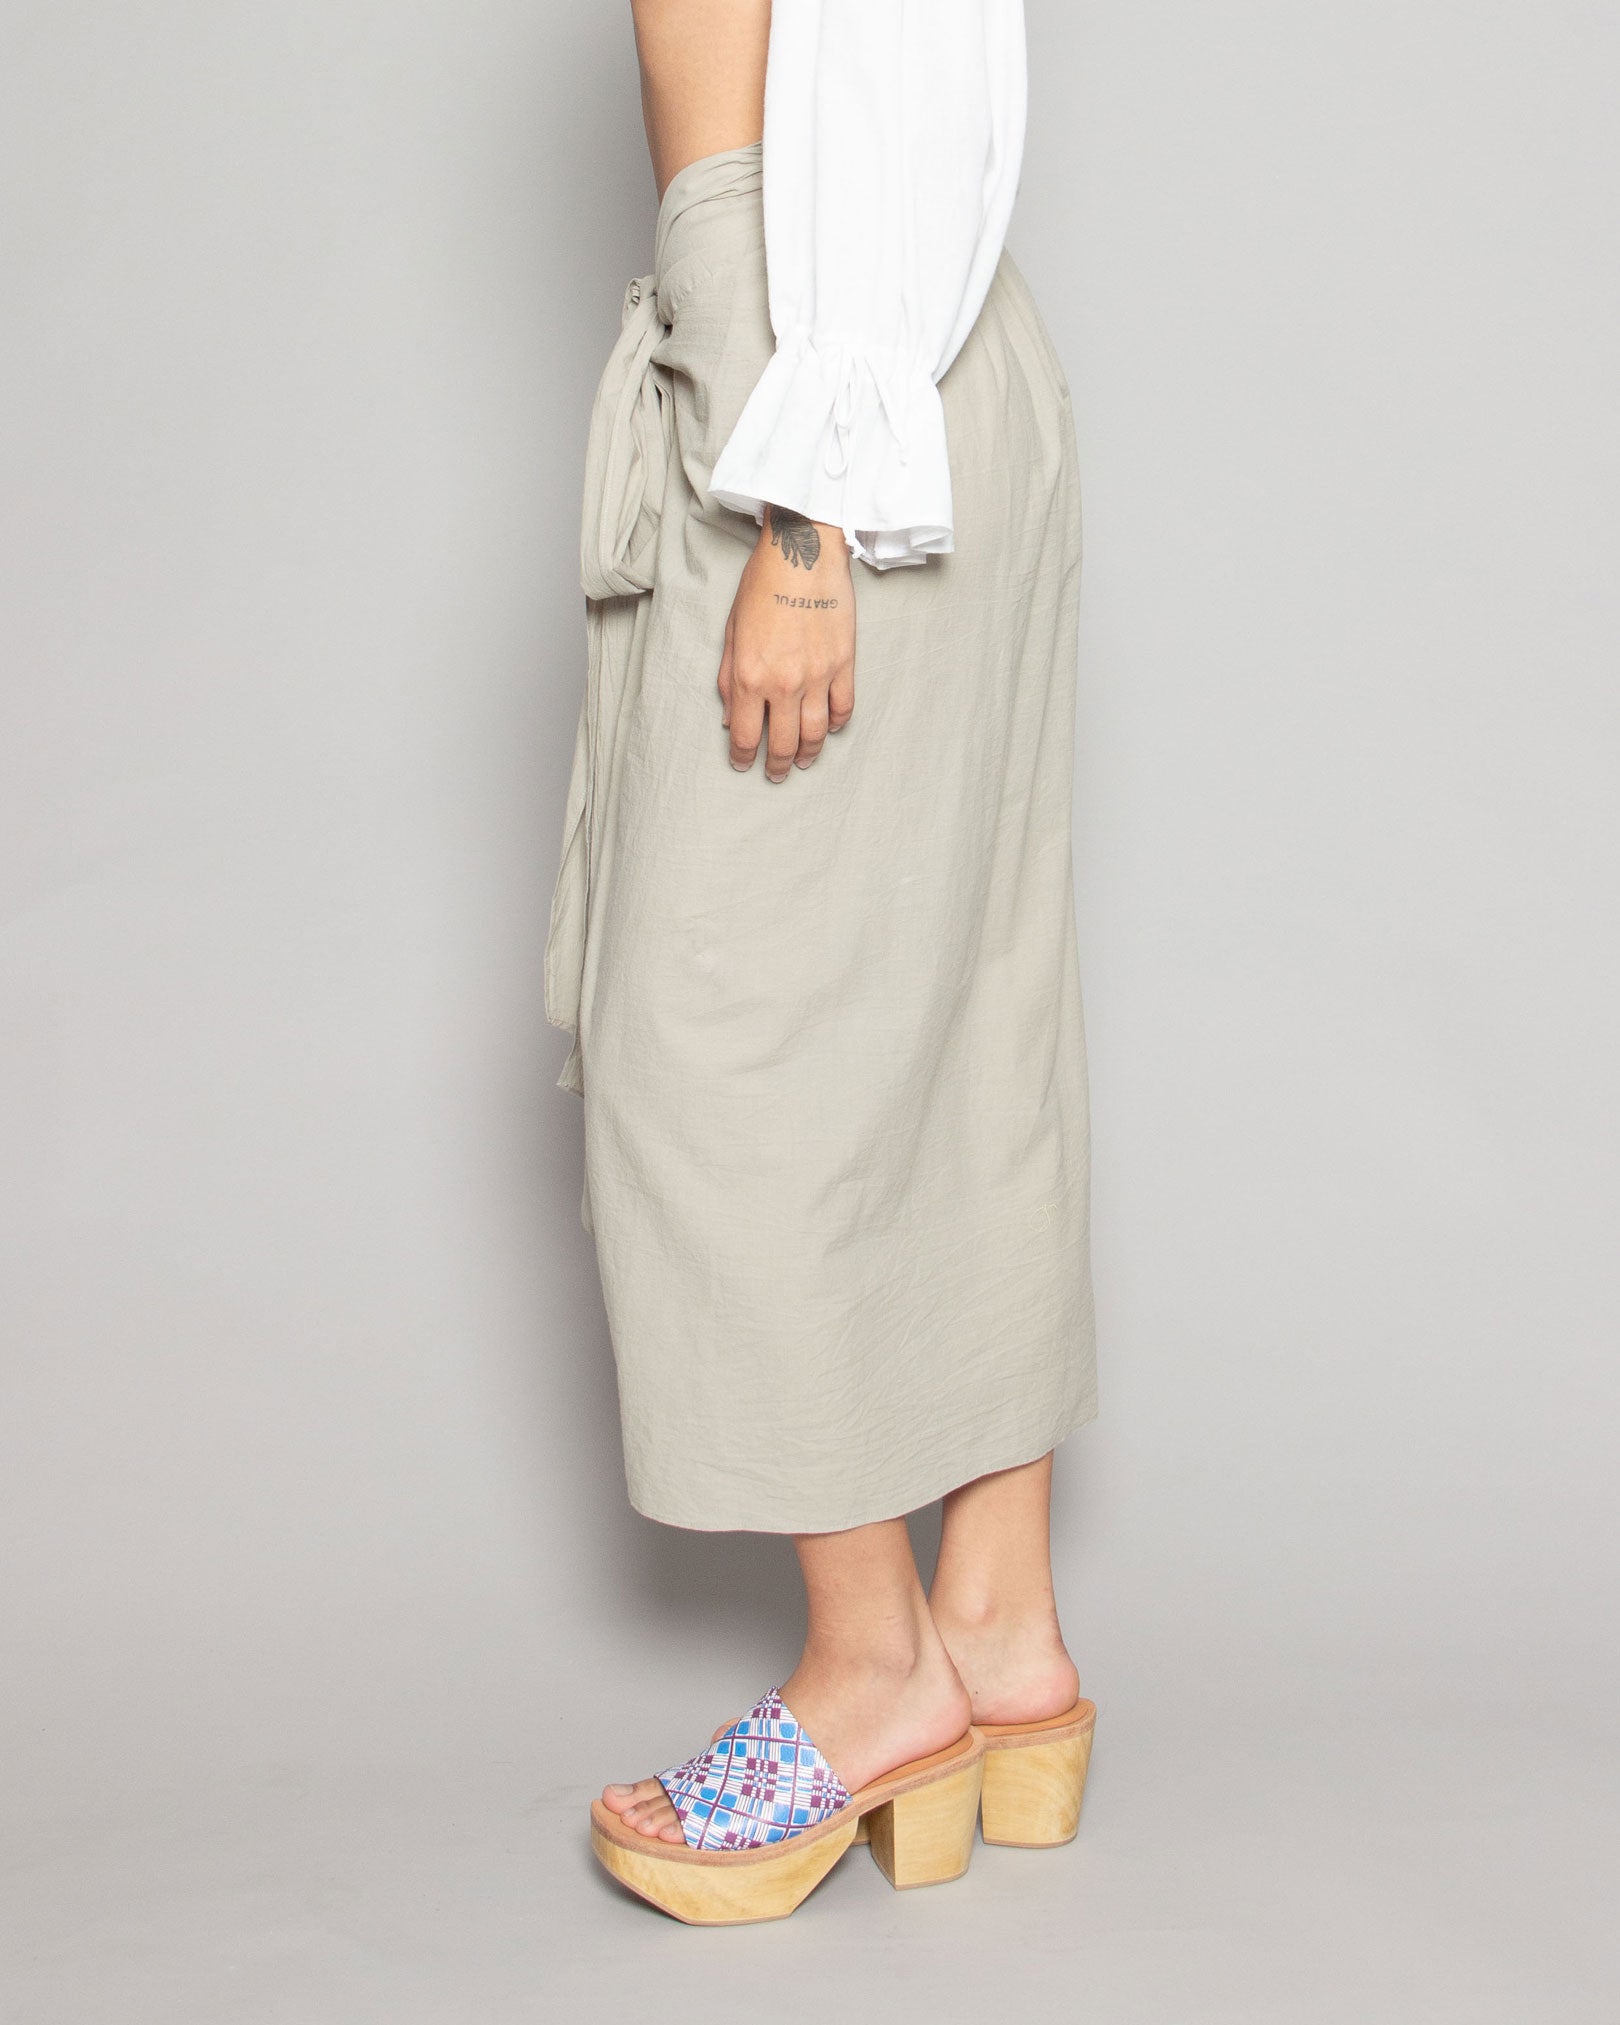 PERSONS Kennedy Sarong Skirt in Thyme available at Lahn.shop